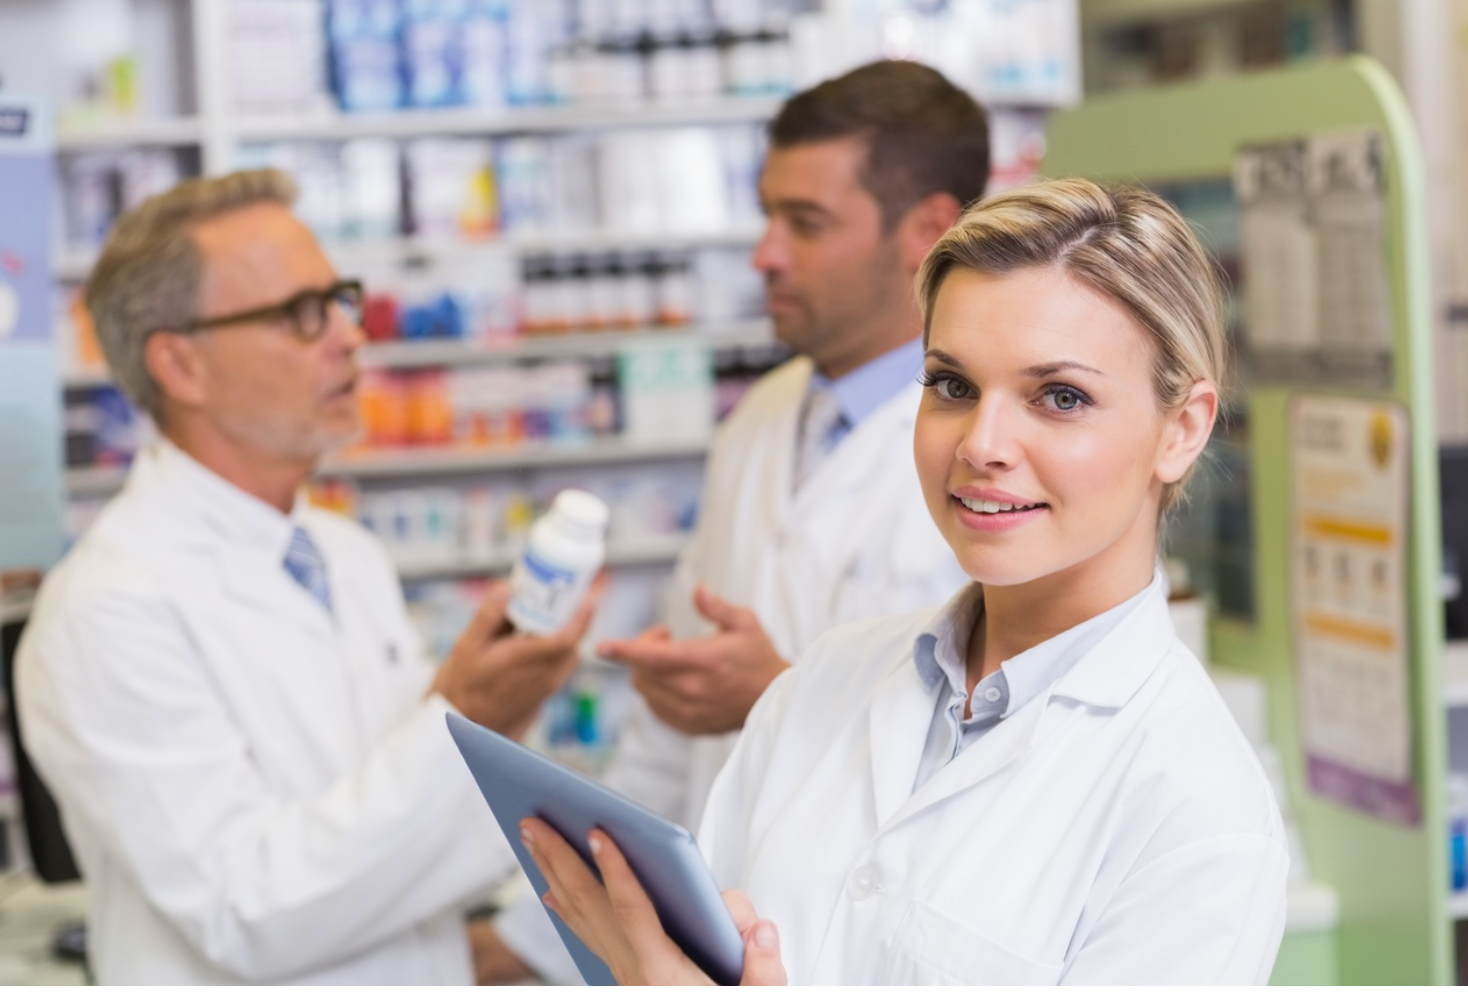 Finding an Opportunity to Advance Pharmacy Practice During a Pandemic